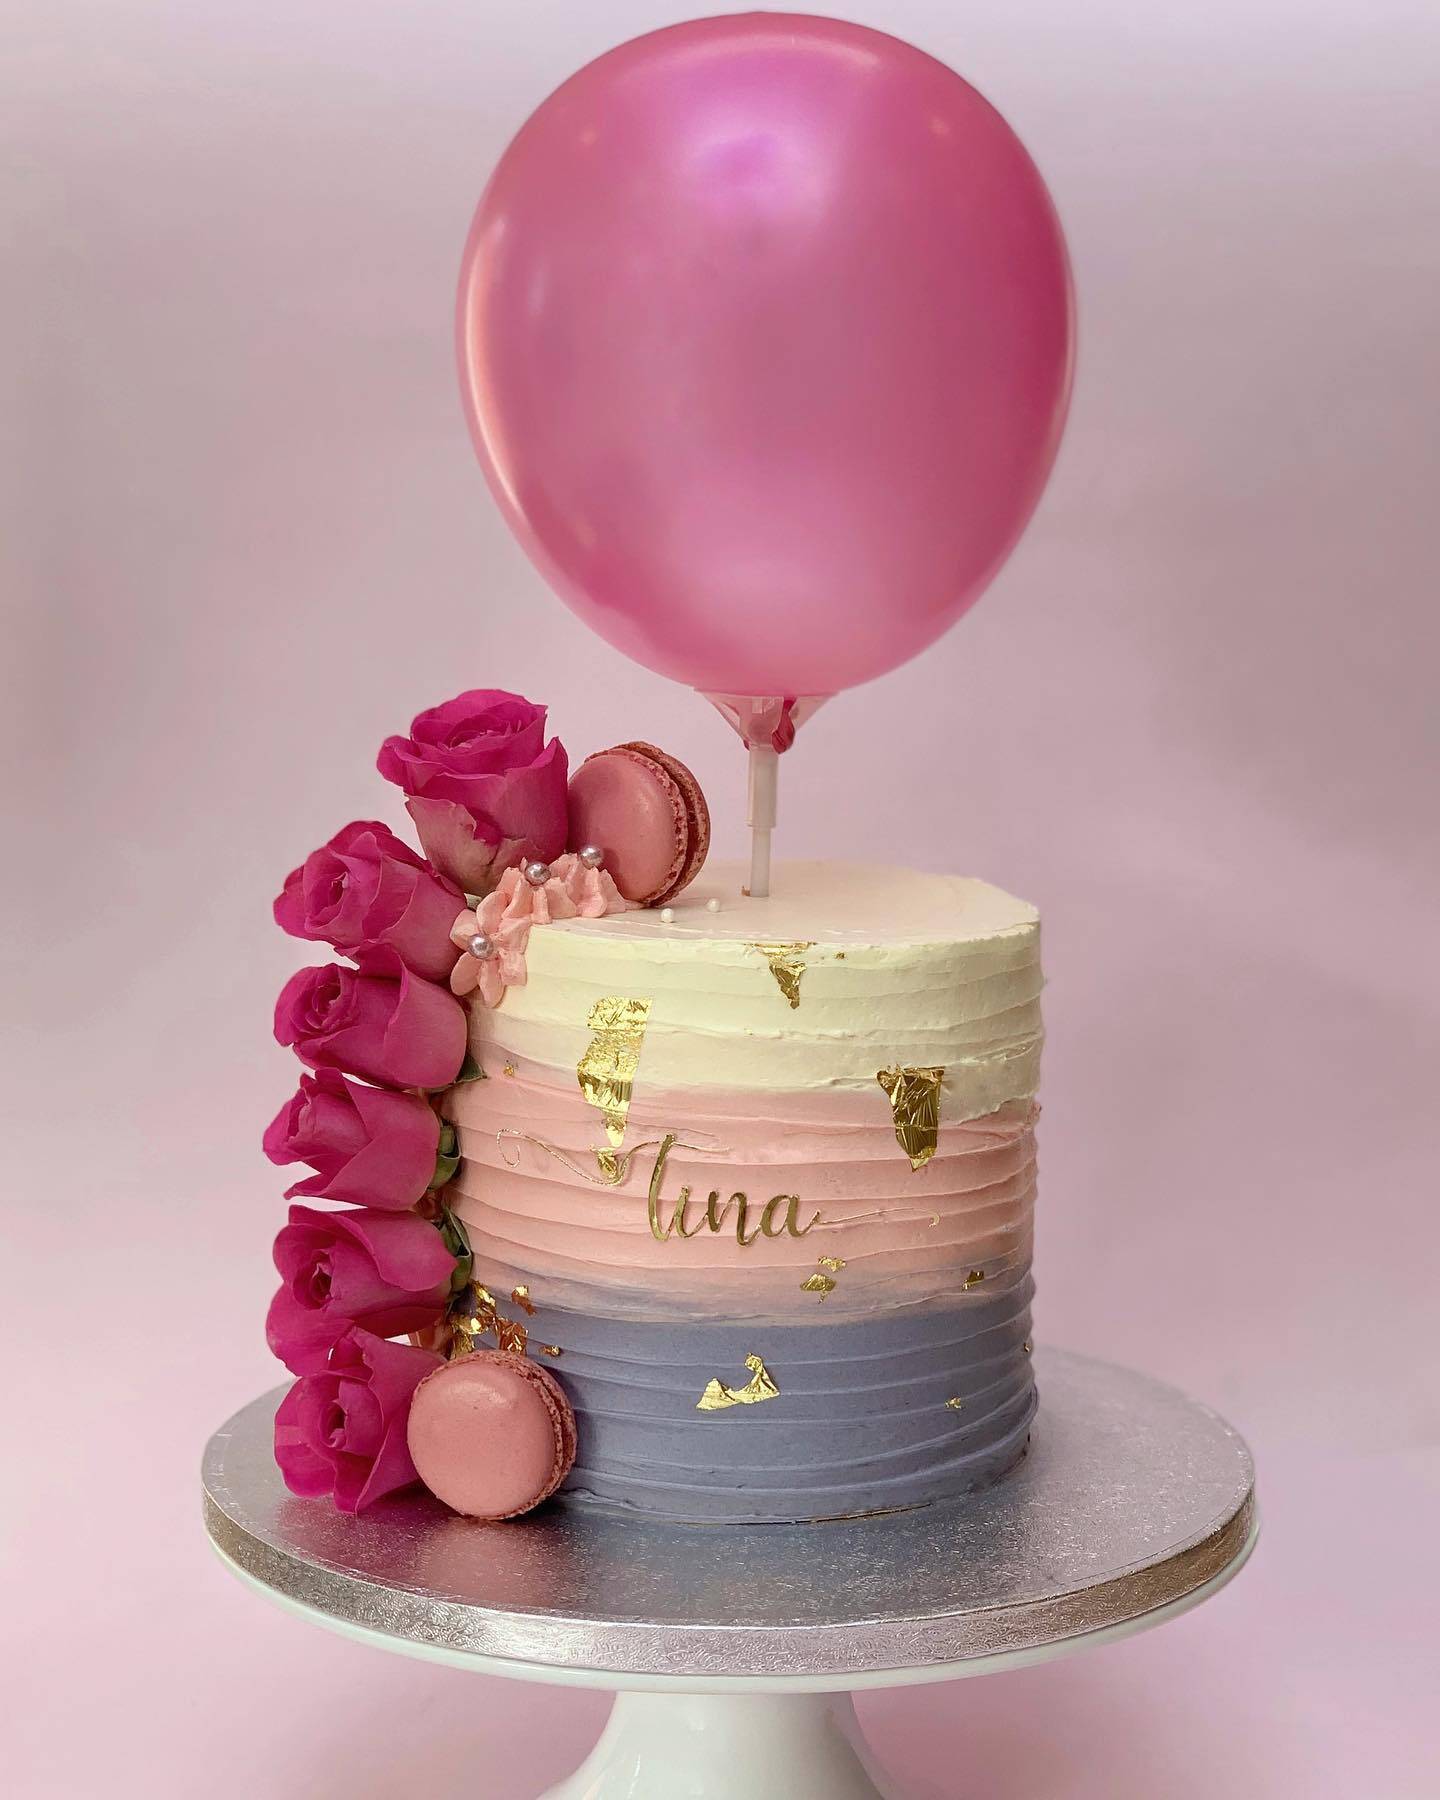 Macaroons Cake with Balloon